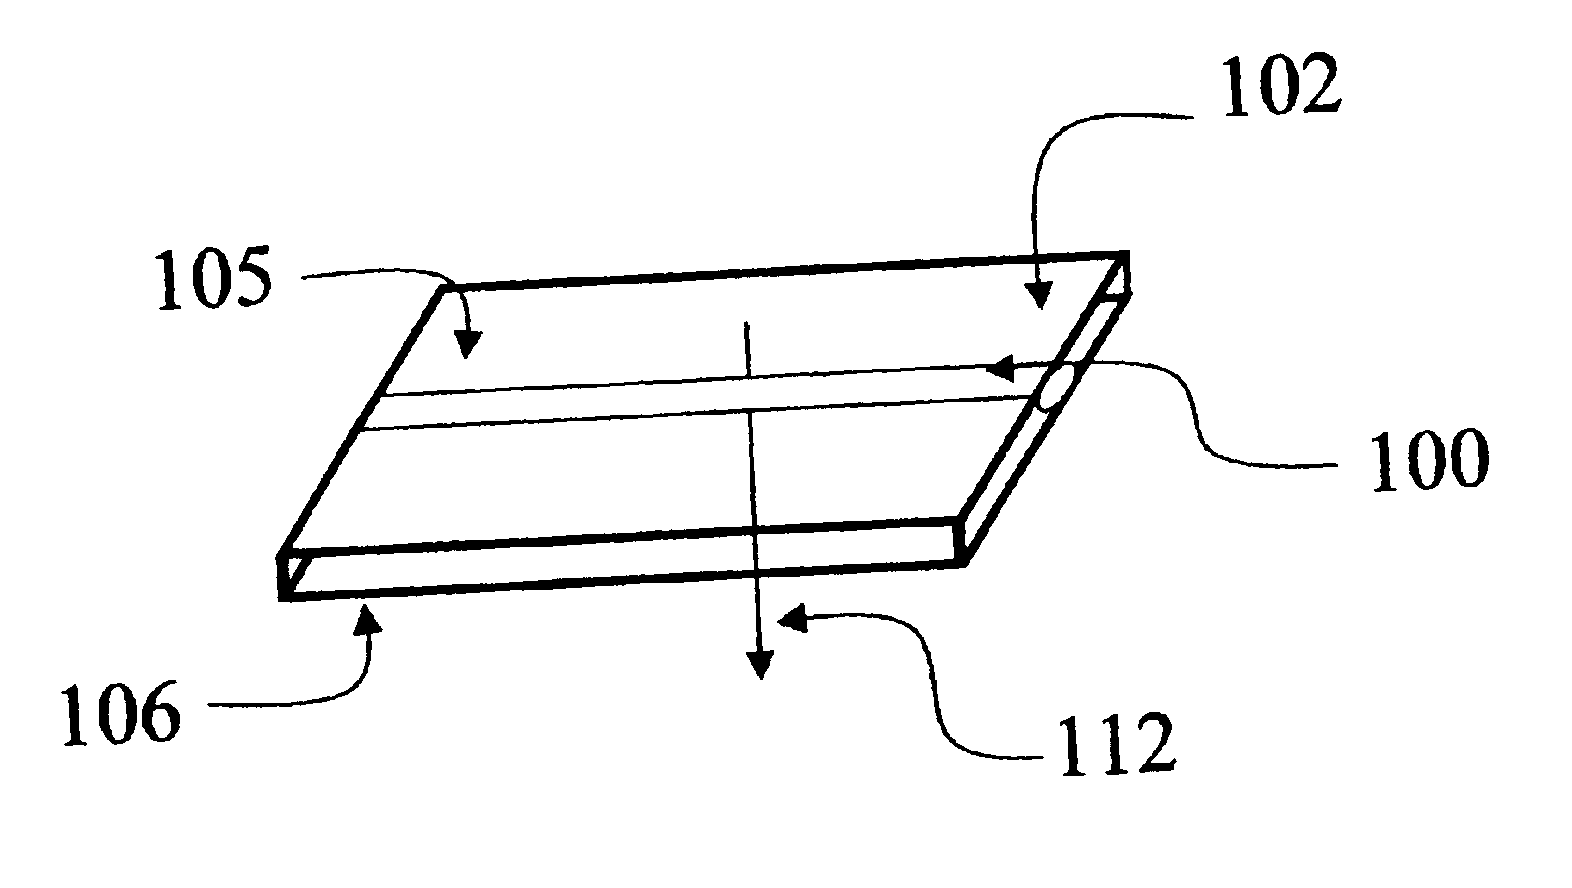 Microvolume device employing fluid movement by centrifugal force